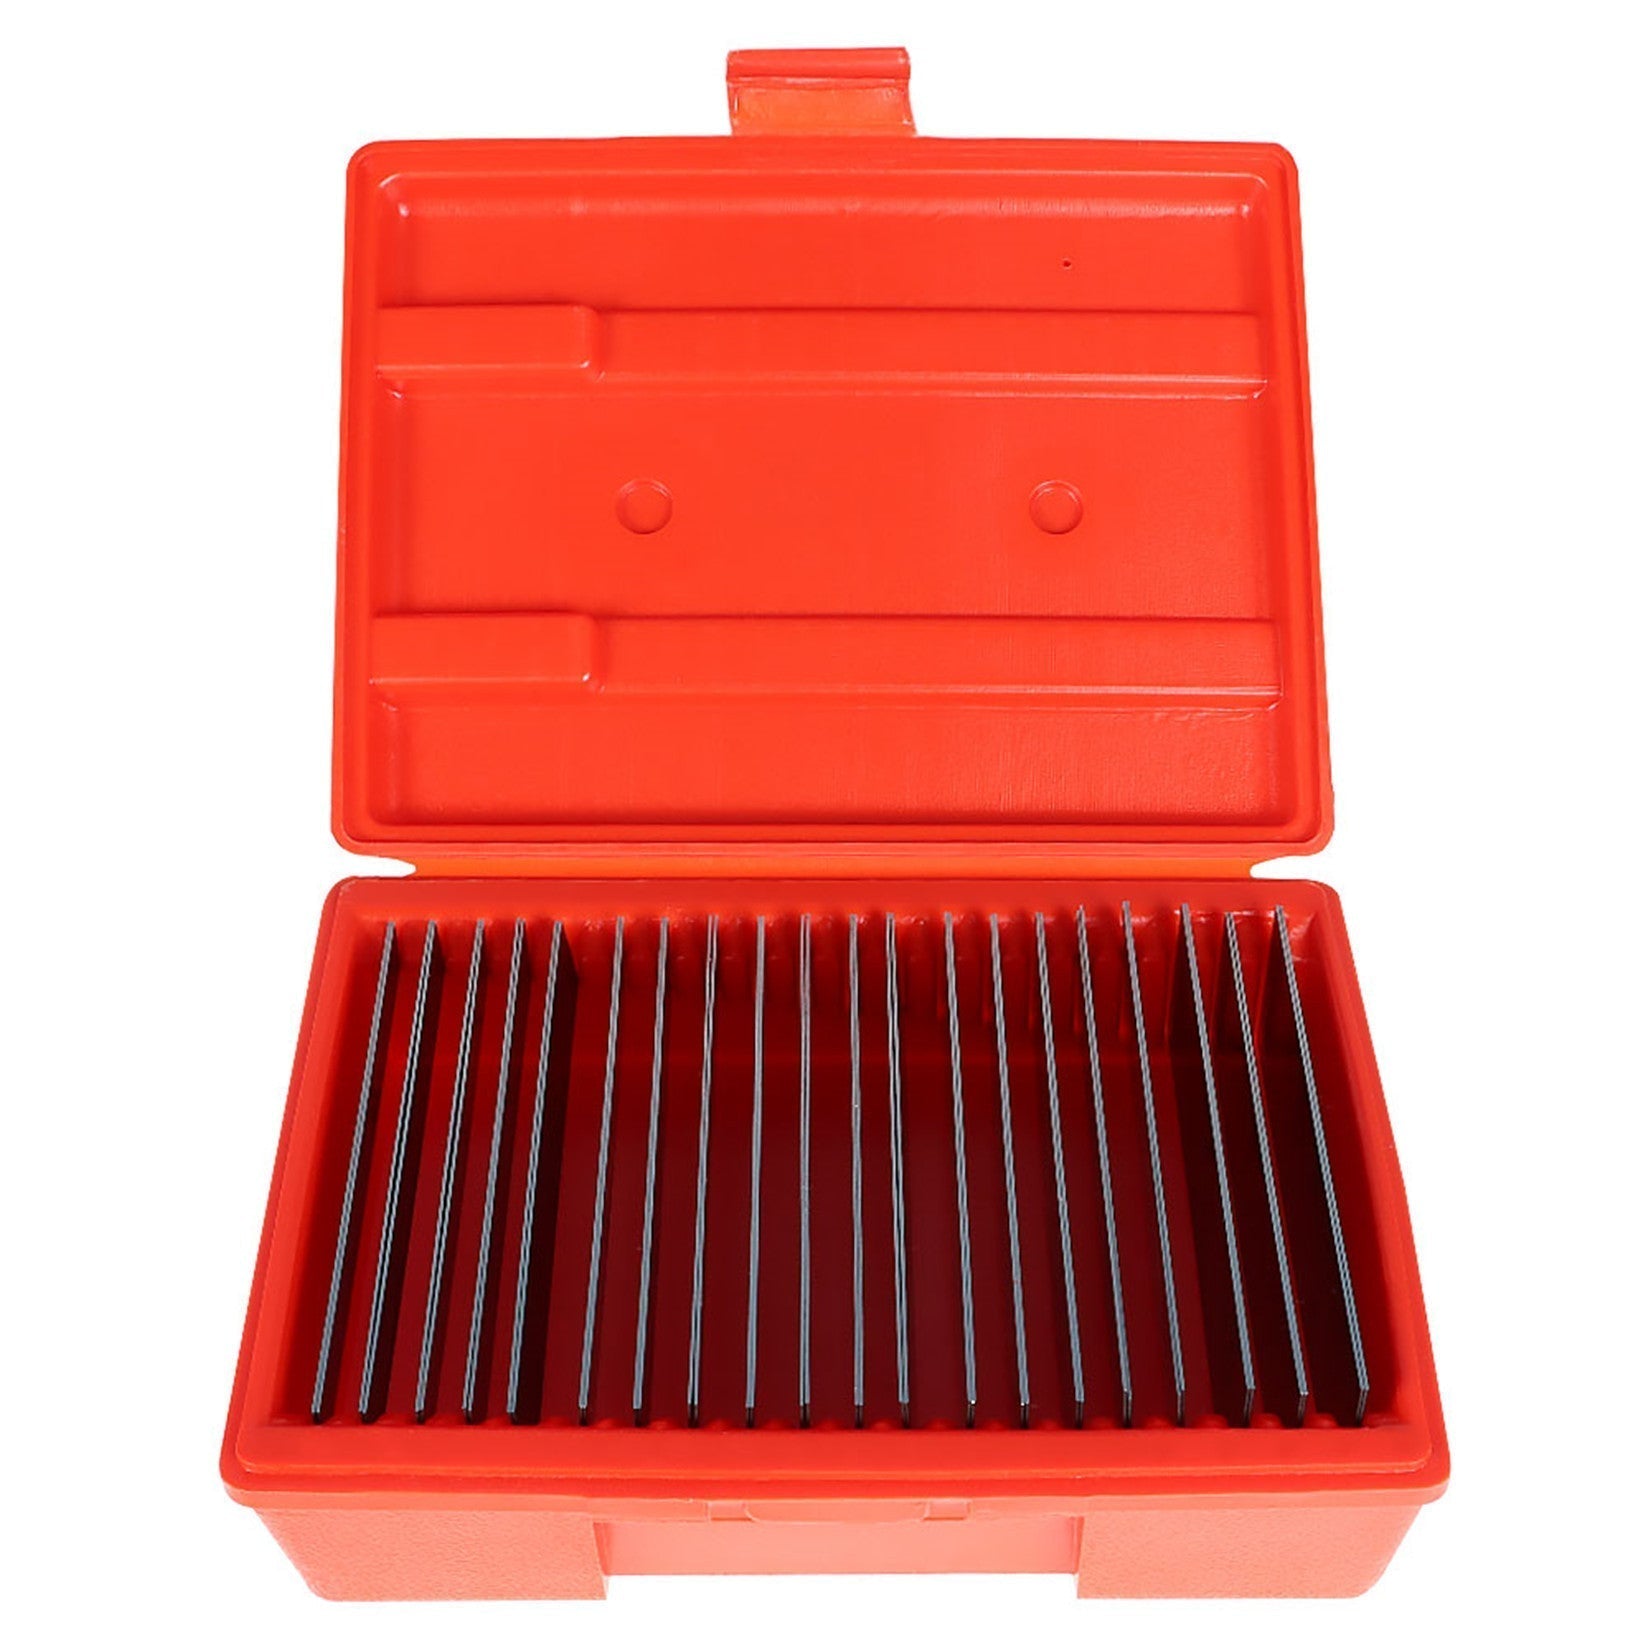 findmall 20 Pair 1/32 x 6 Precision Parallel Block Set .0001 Hardened Precision Machinist Tools with Case FINDMALLPARTS